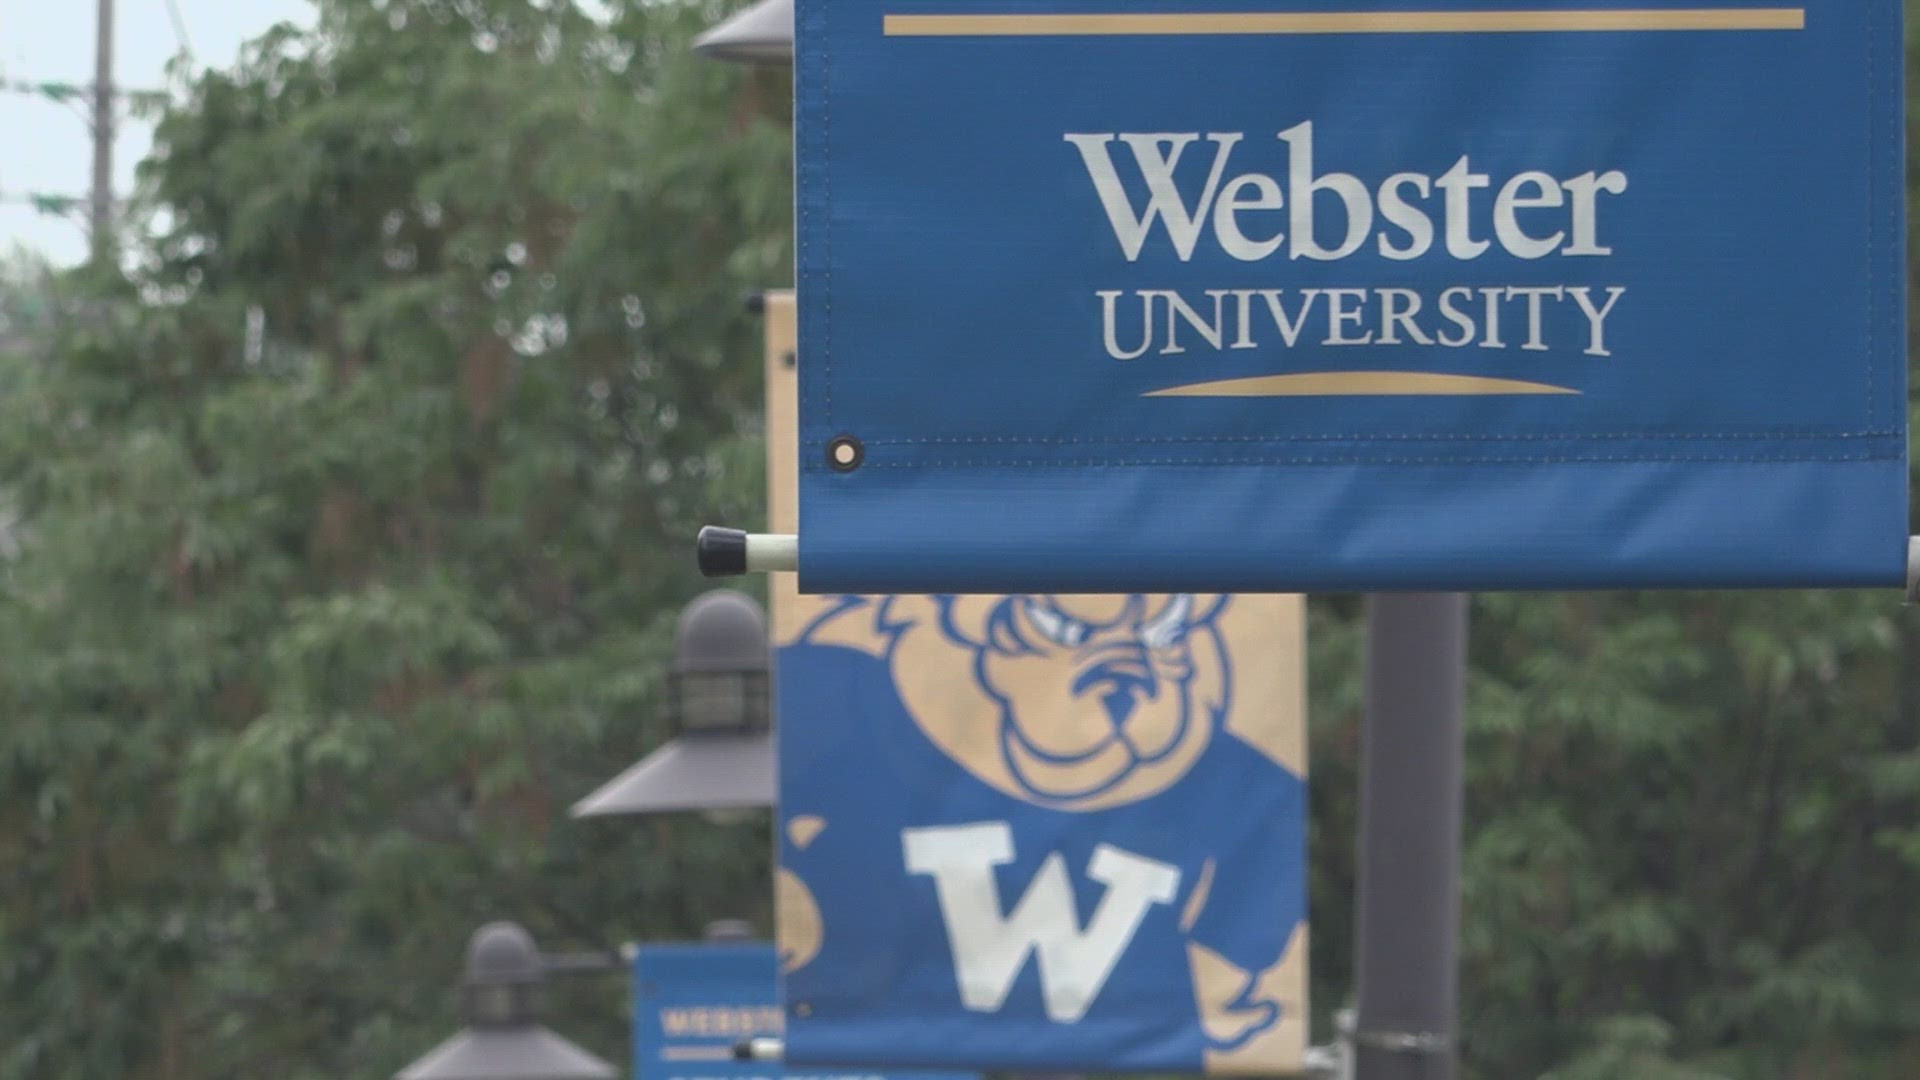 It's been a chaotic week at Webster University. This week, the faculty voted "no confidence" in school leadership.